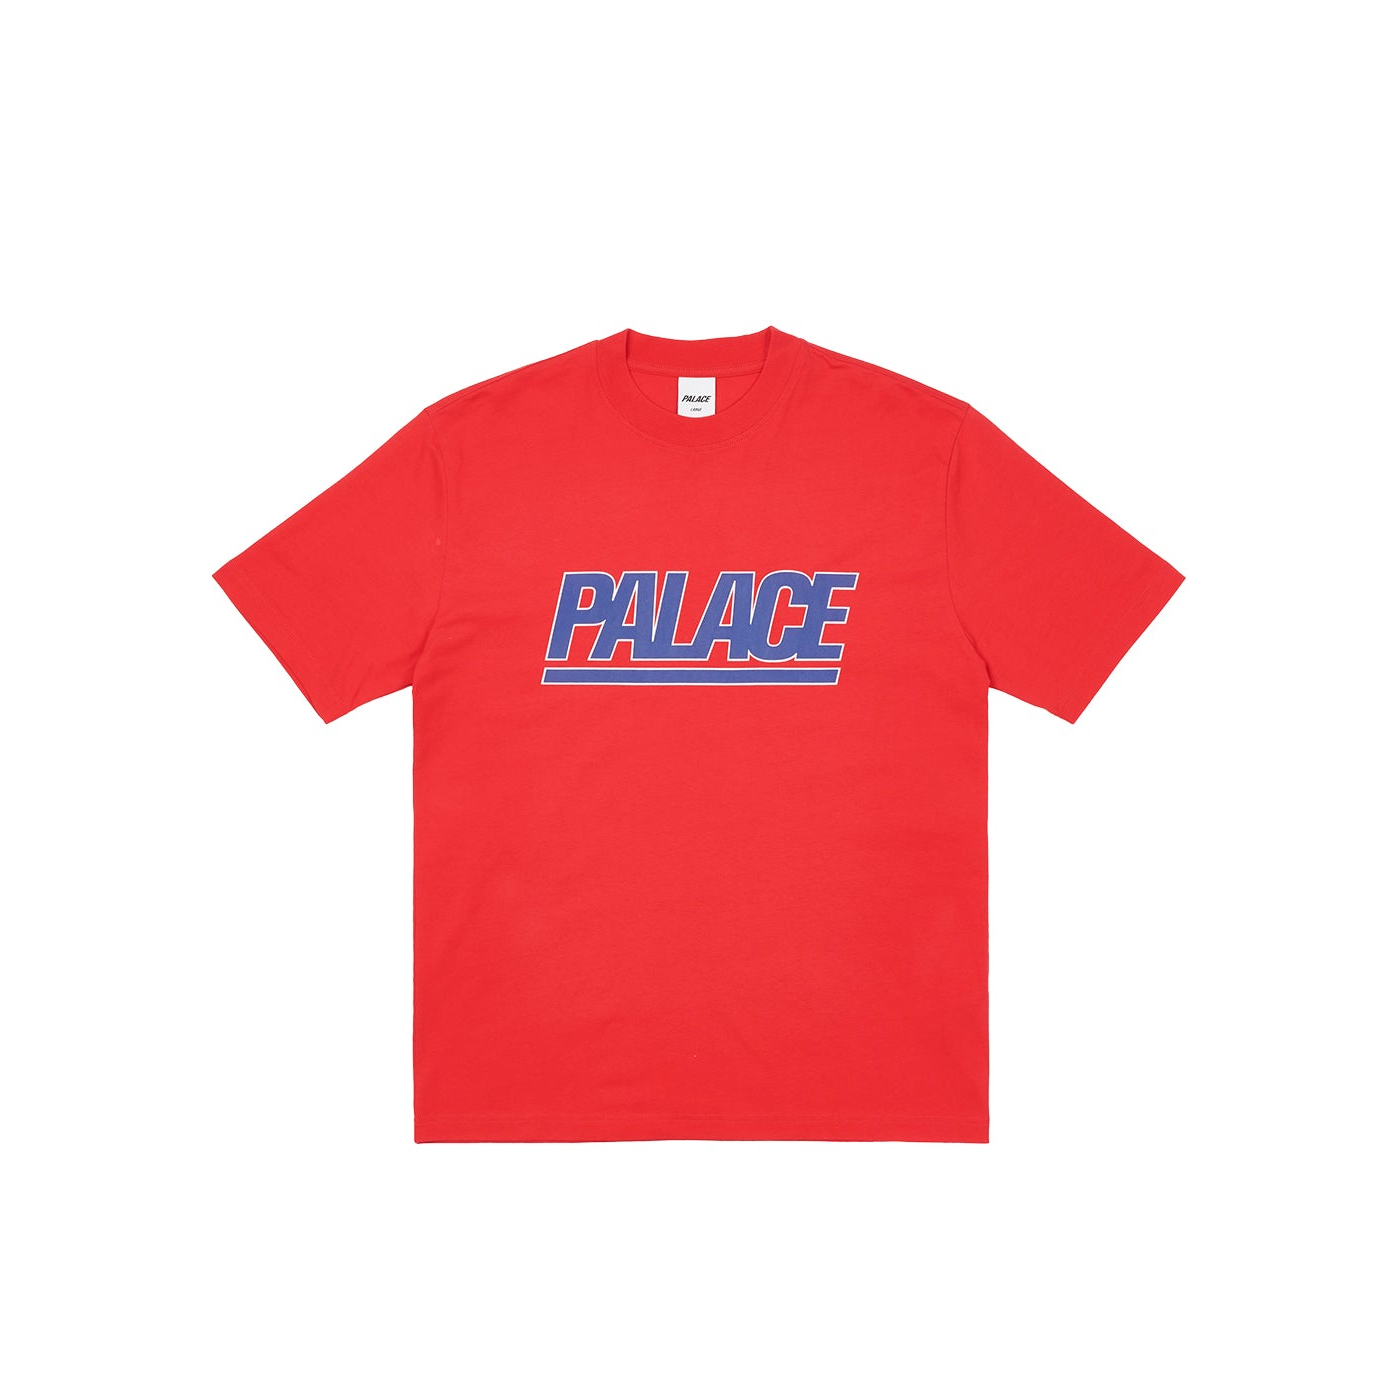 Thumbnail GIGANTIC T-SHIRT RED one color